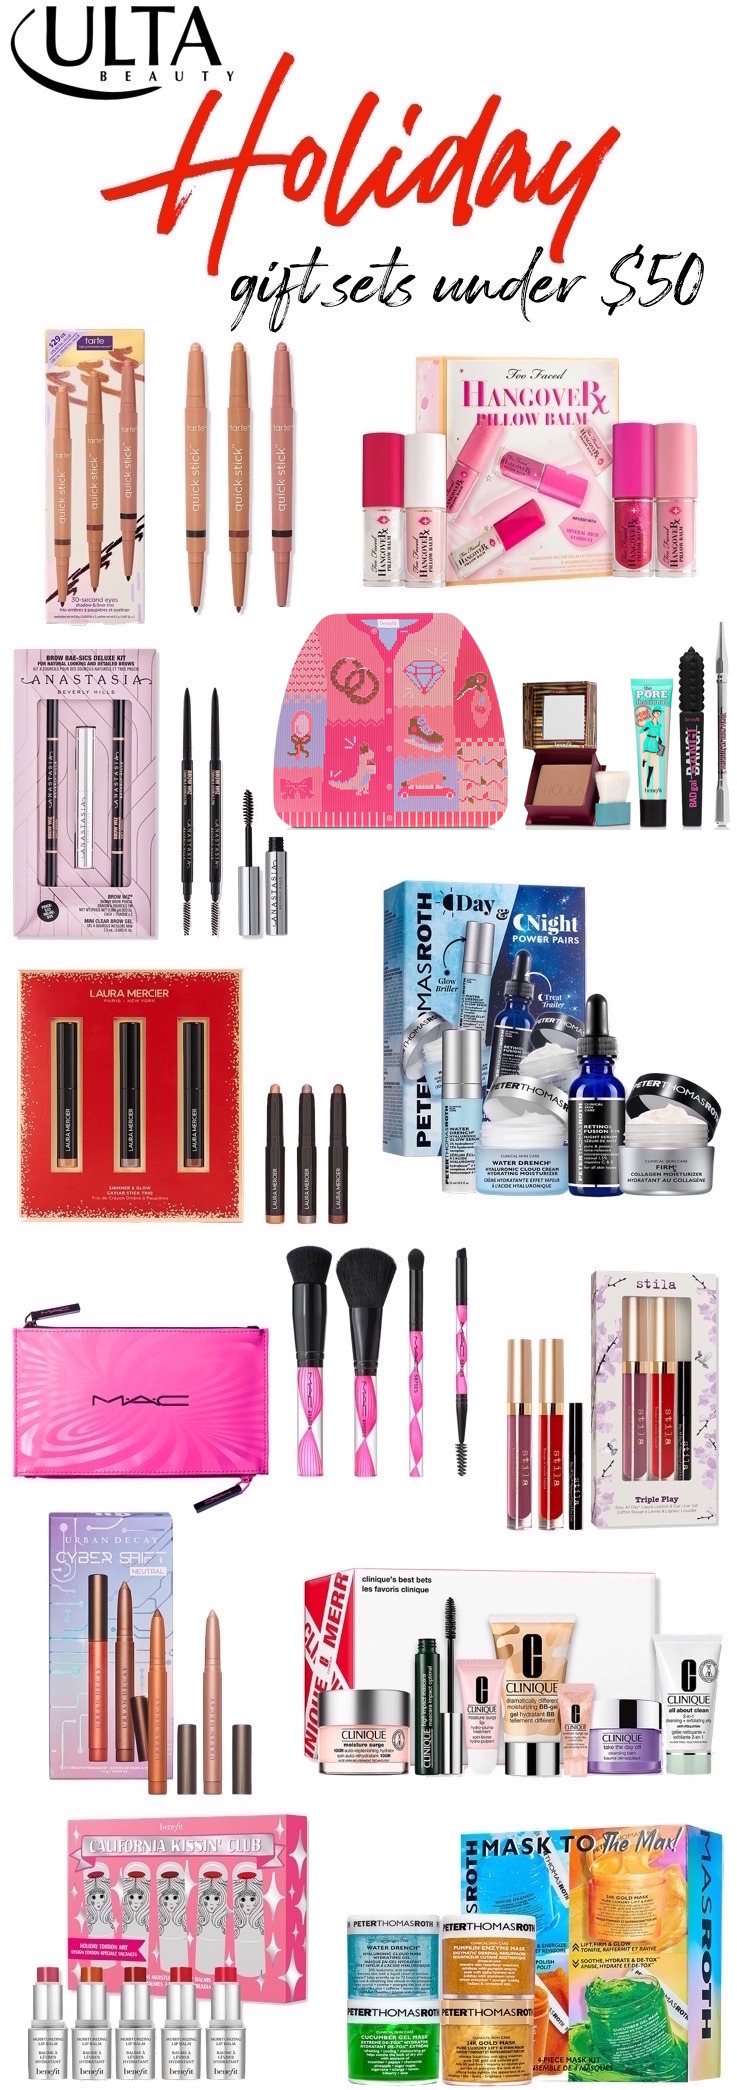 Give them Glam! Here are the best Ulta beauty gift sets (all under $50) that are sure to spread the holiday cheer!